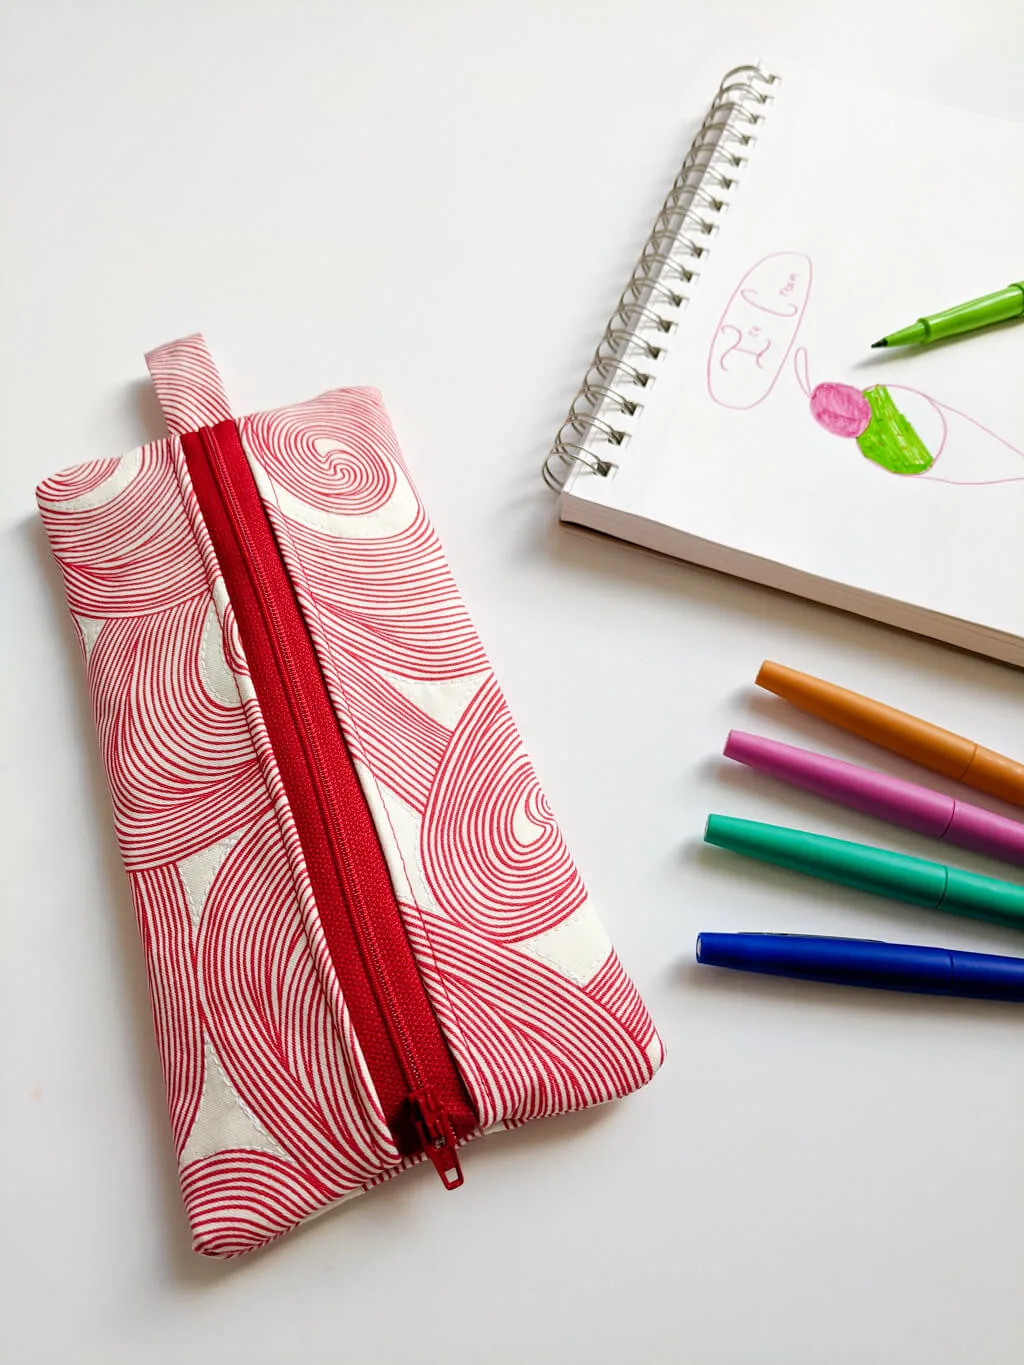 DIY zipper pencil case next to a drawing and pens